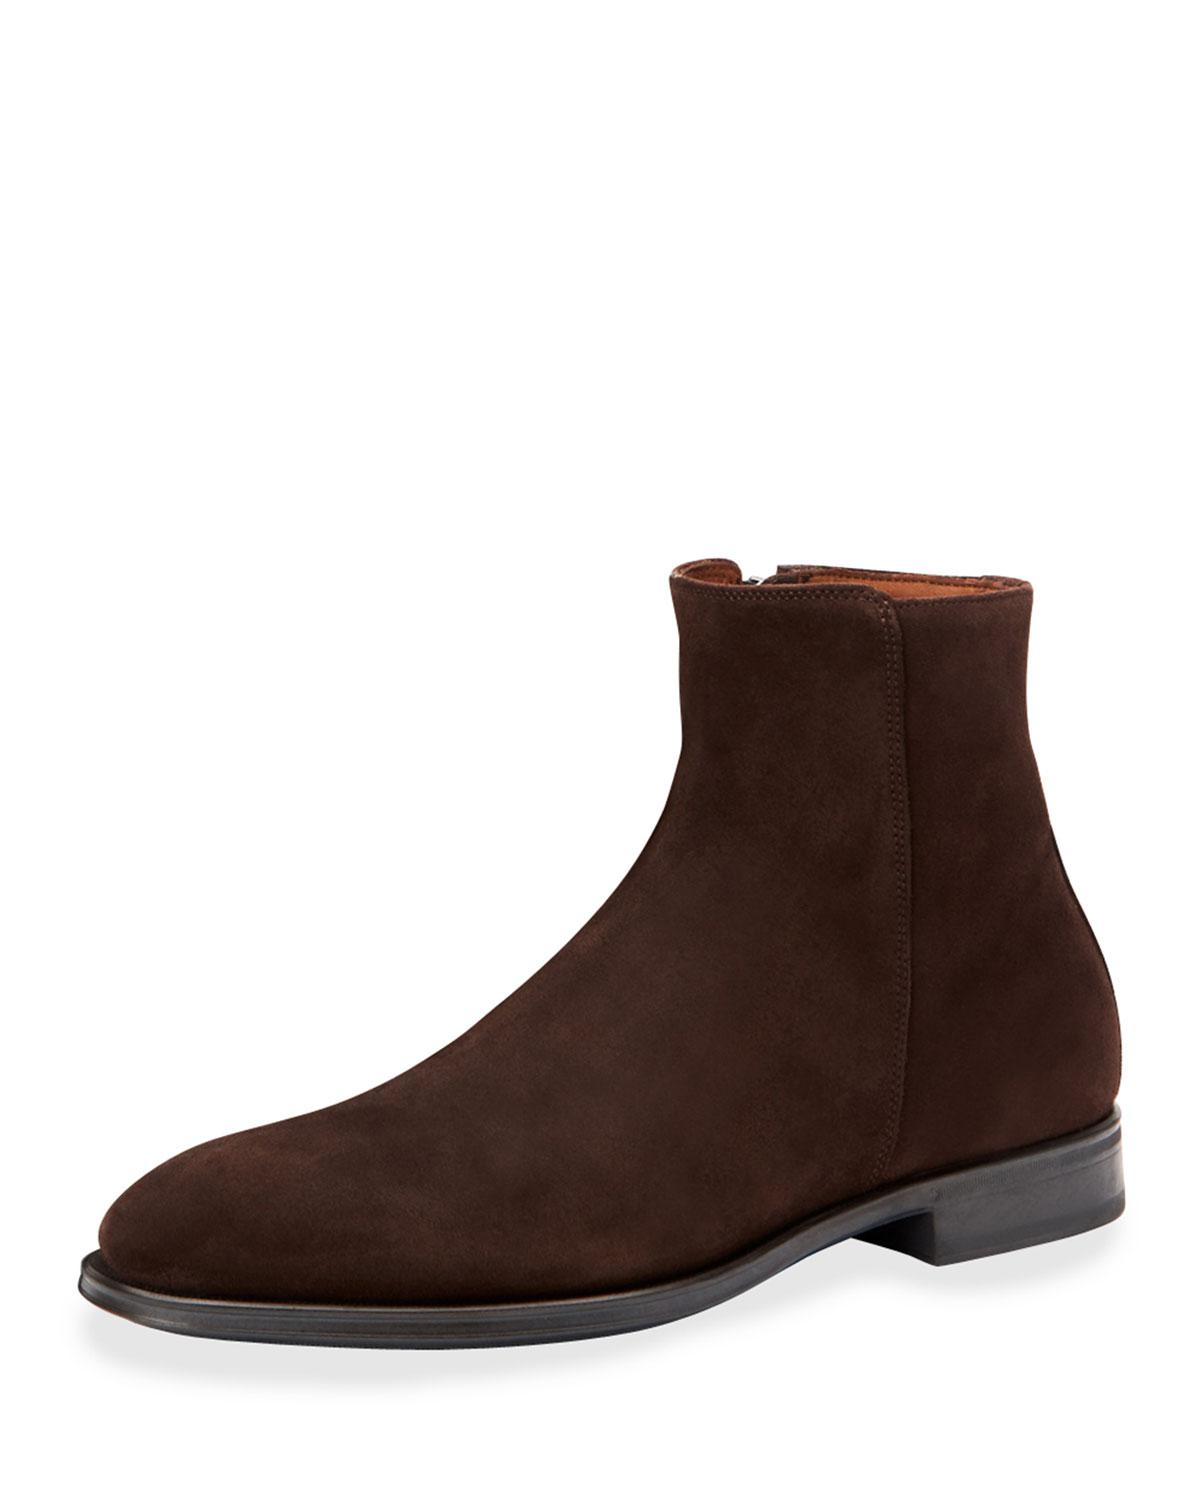 mens side zip ankle boots